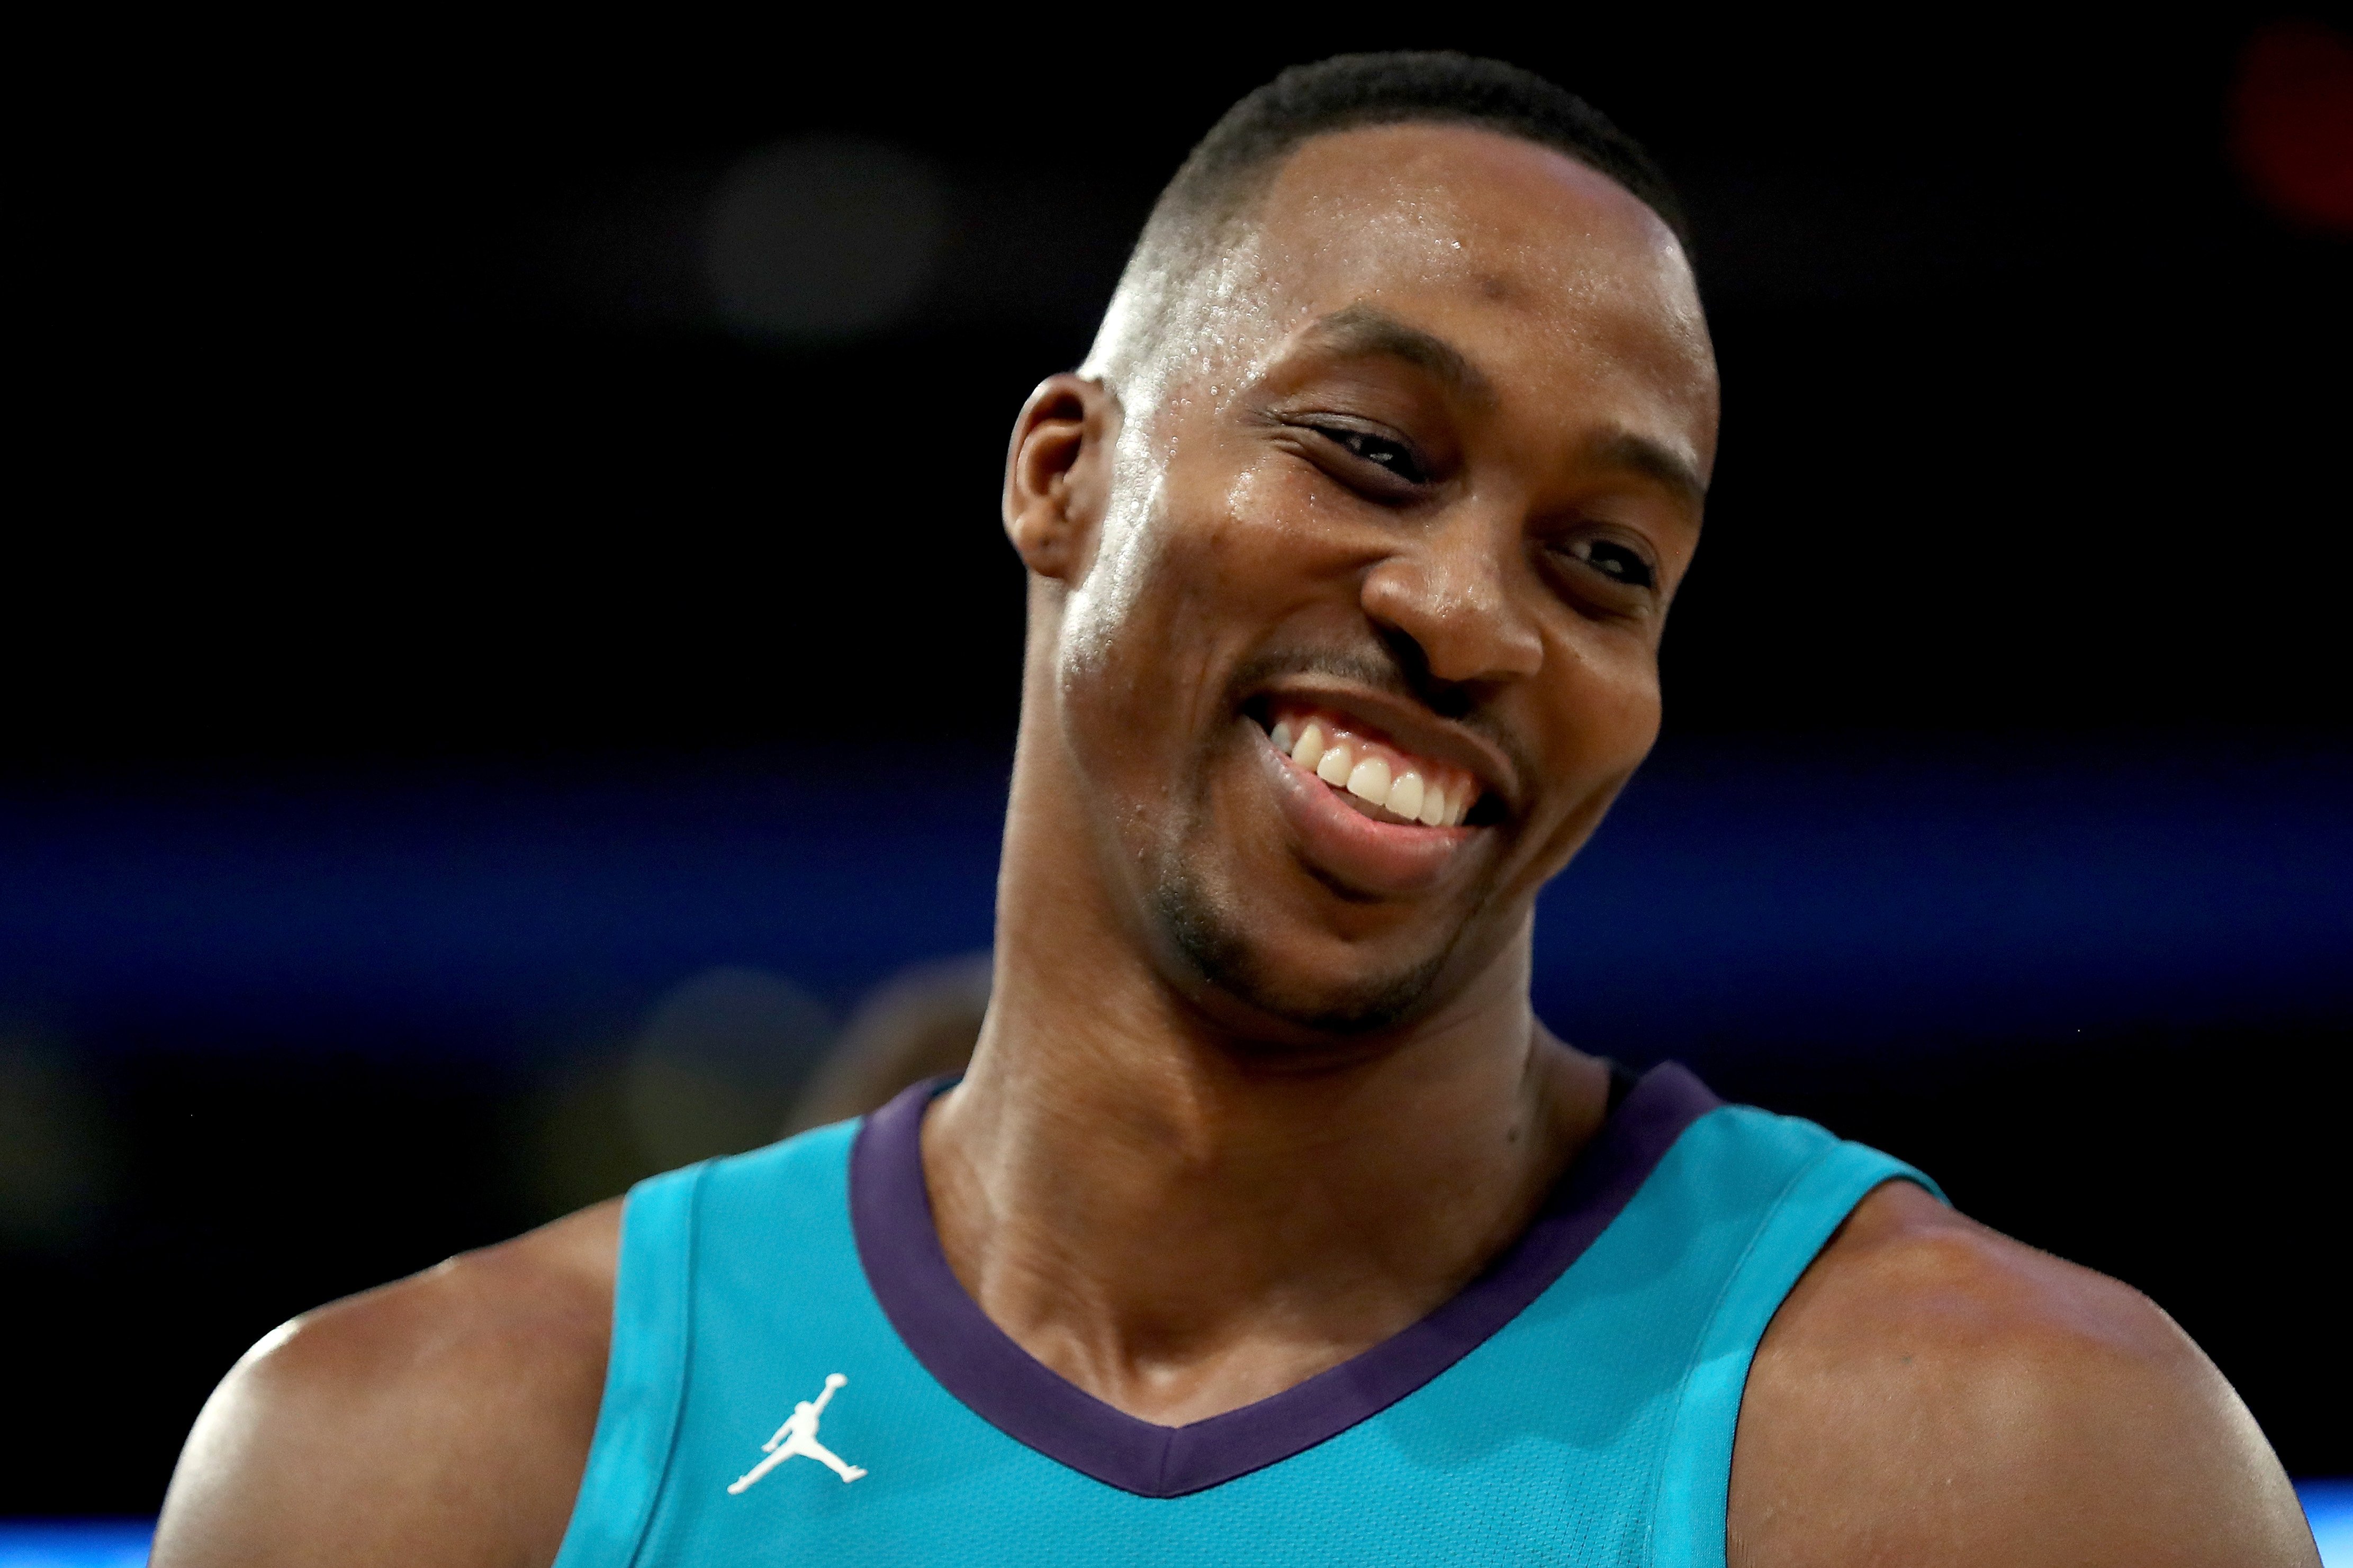 Dwight Howard Raves About Smackdown Live, What Does Baron Corbin Listen To When He Works Out?, What Is Randy Savage’s Most Memorable Move?